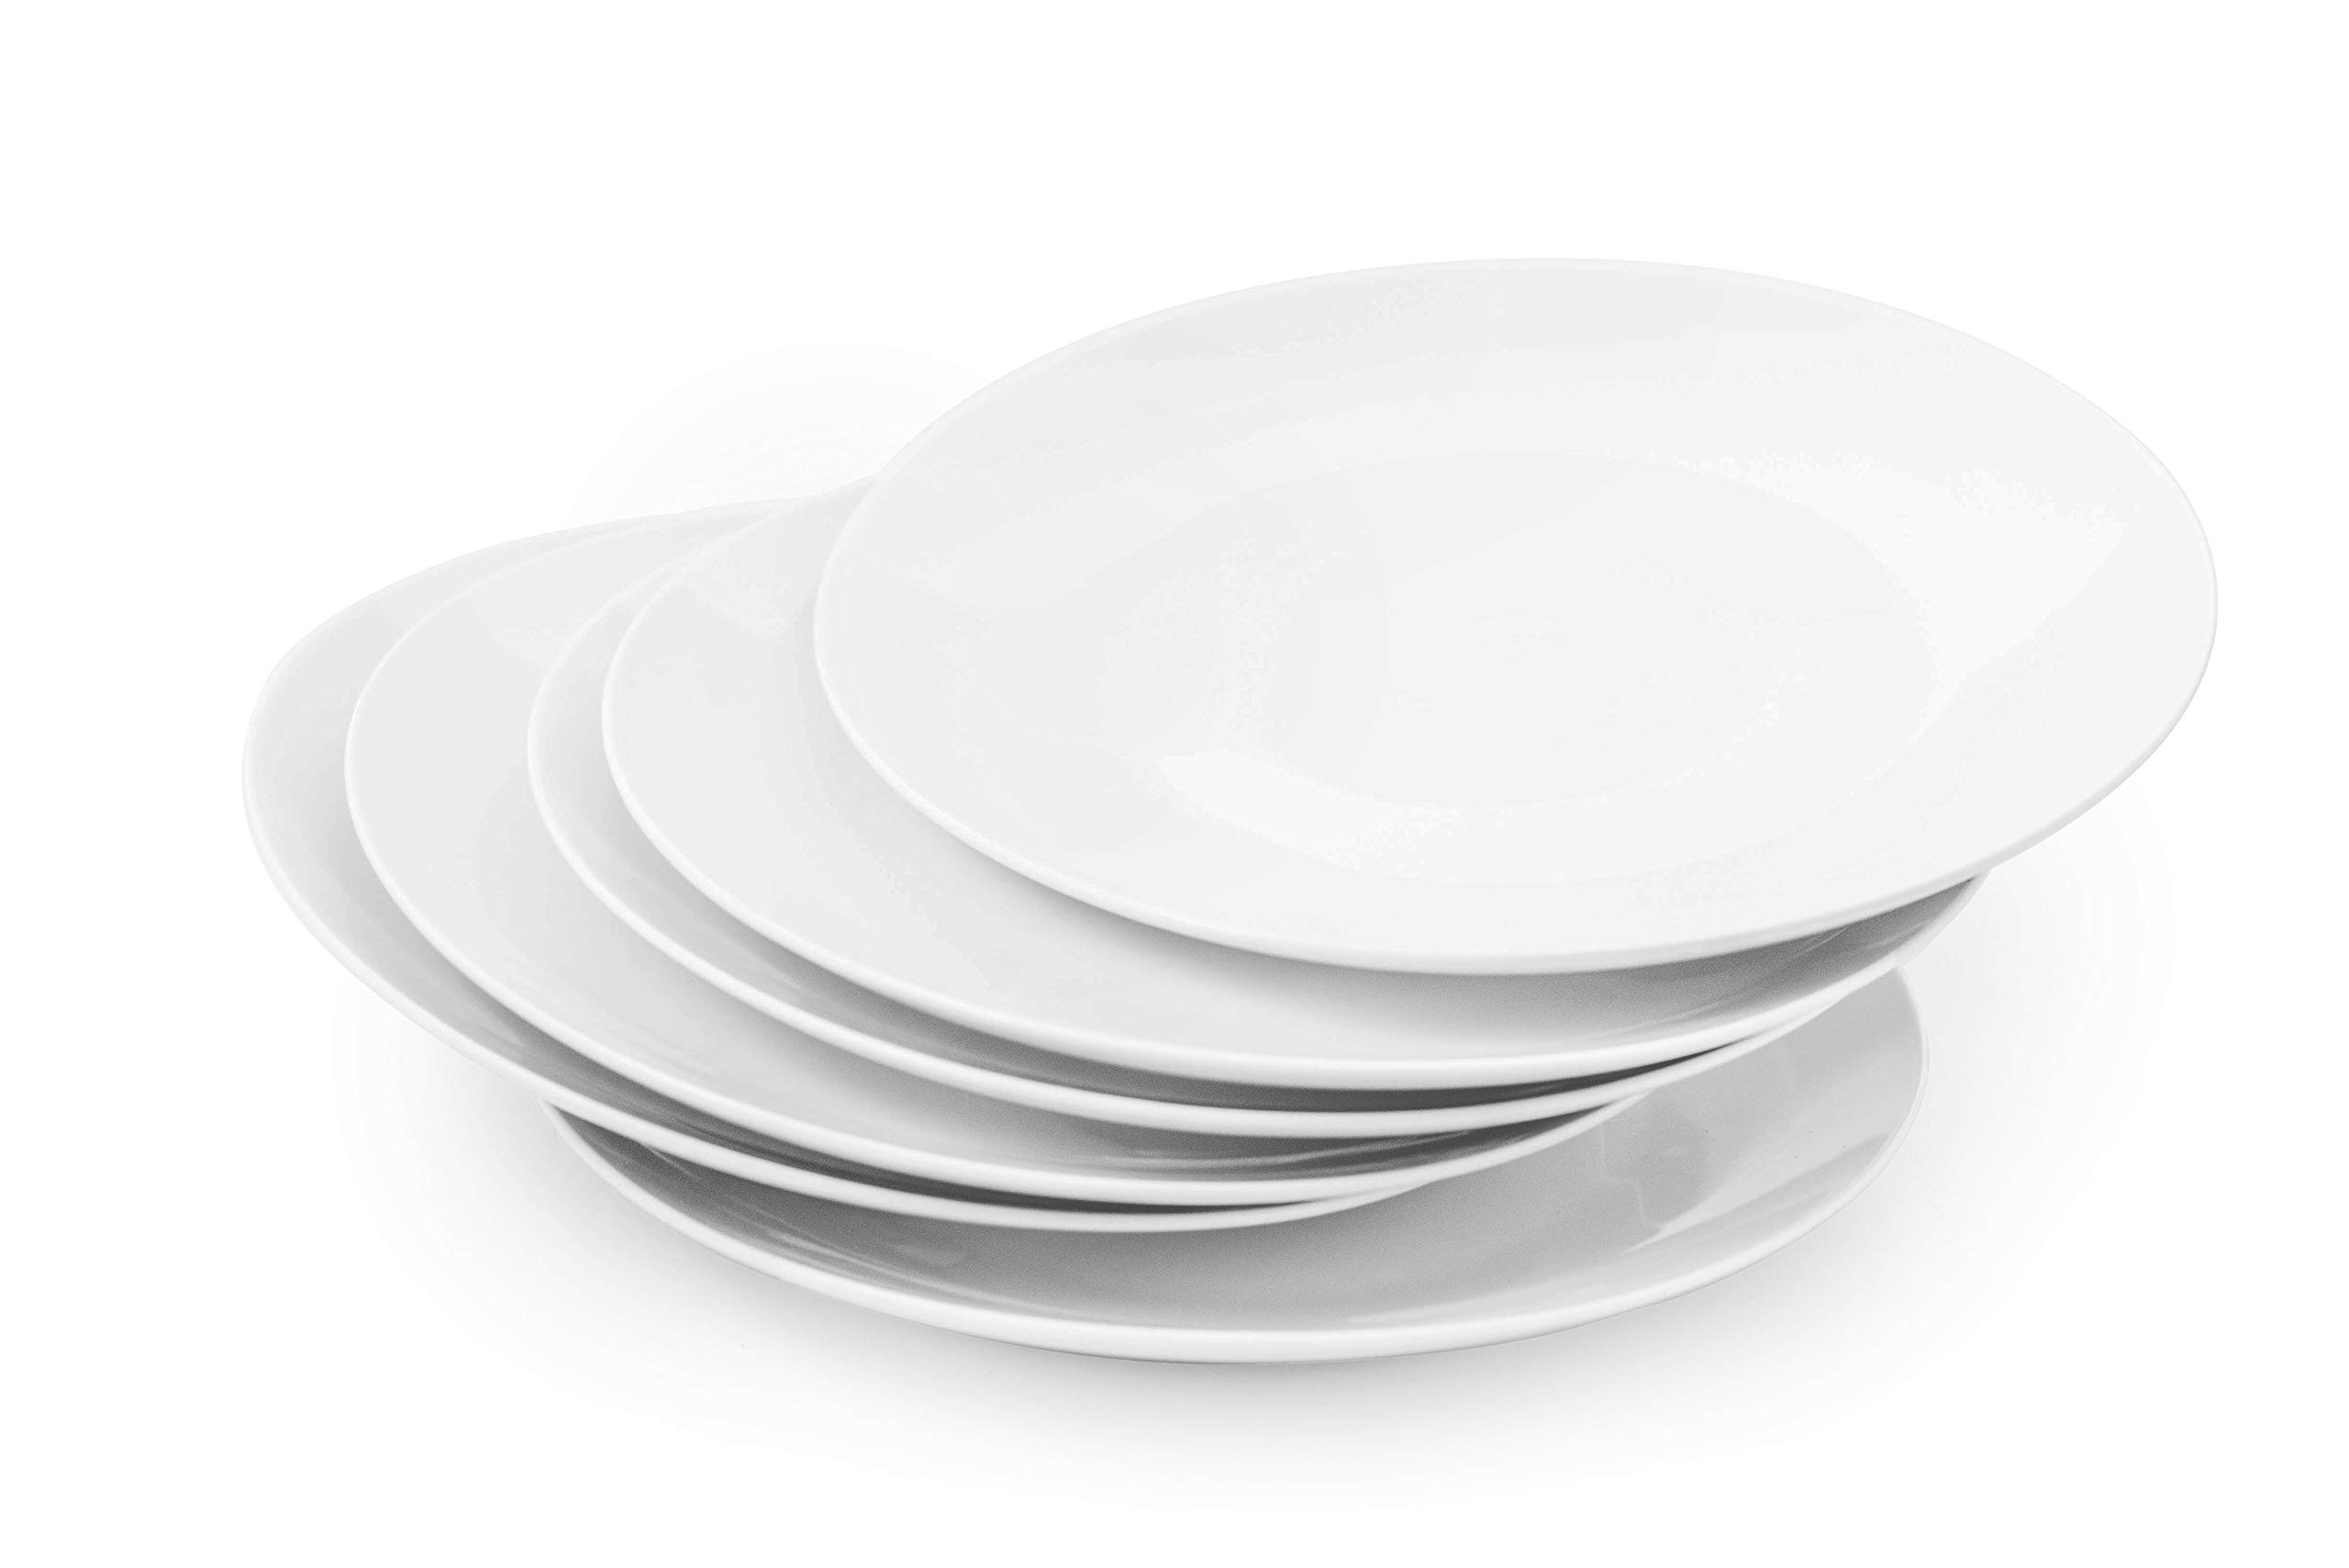 Amuse- Professional Gourmet Coupe Dinner Plate-10.5''- Set of 6